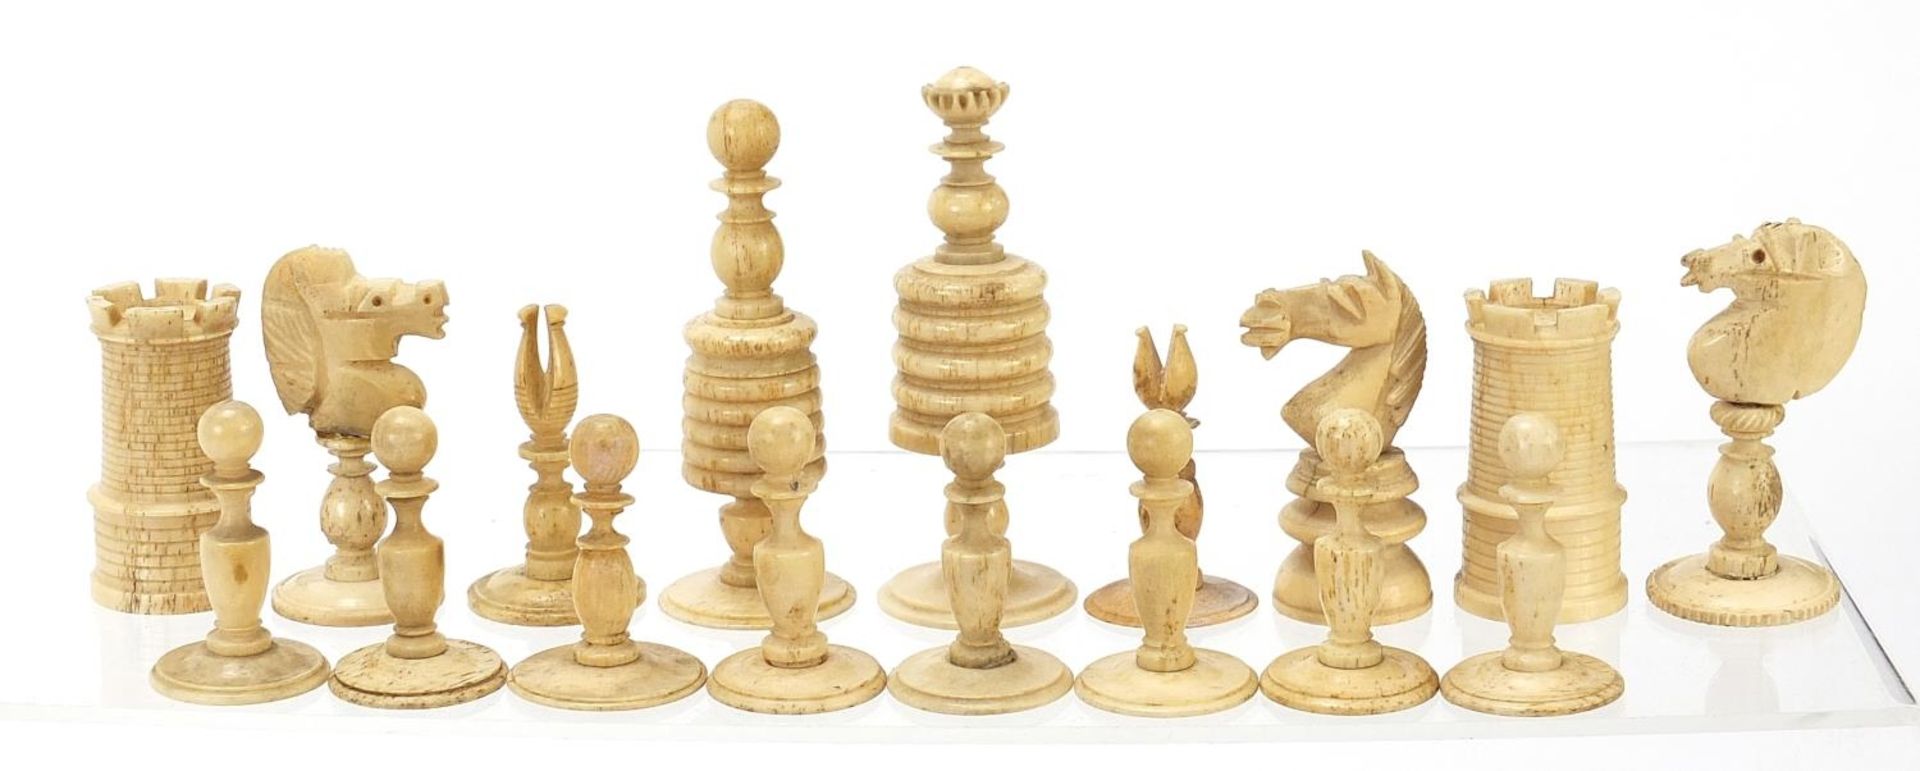 Half stained carved bone chess set and a mahogany case, the largest chess pieces 8.5cm high - Image 3 of 7